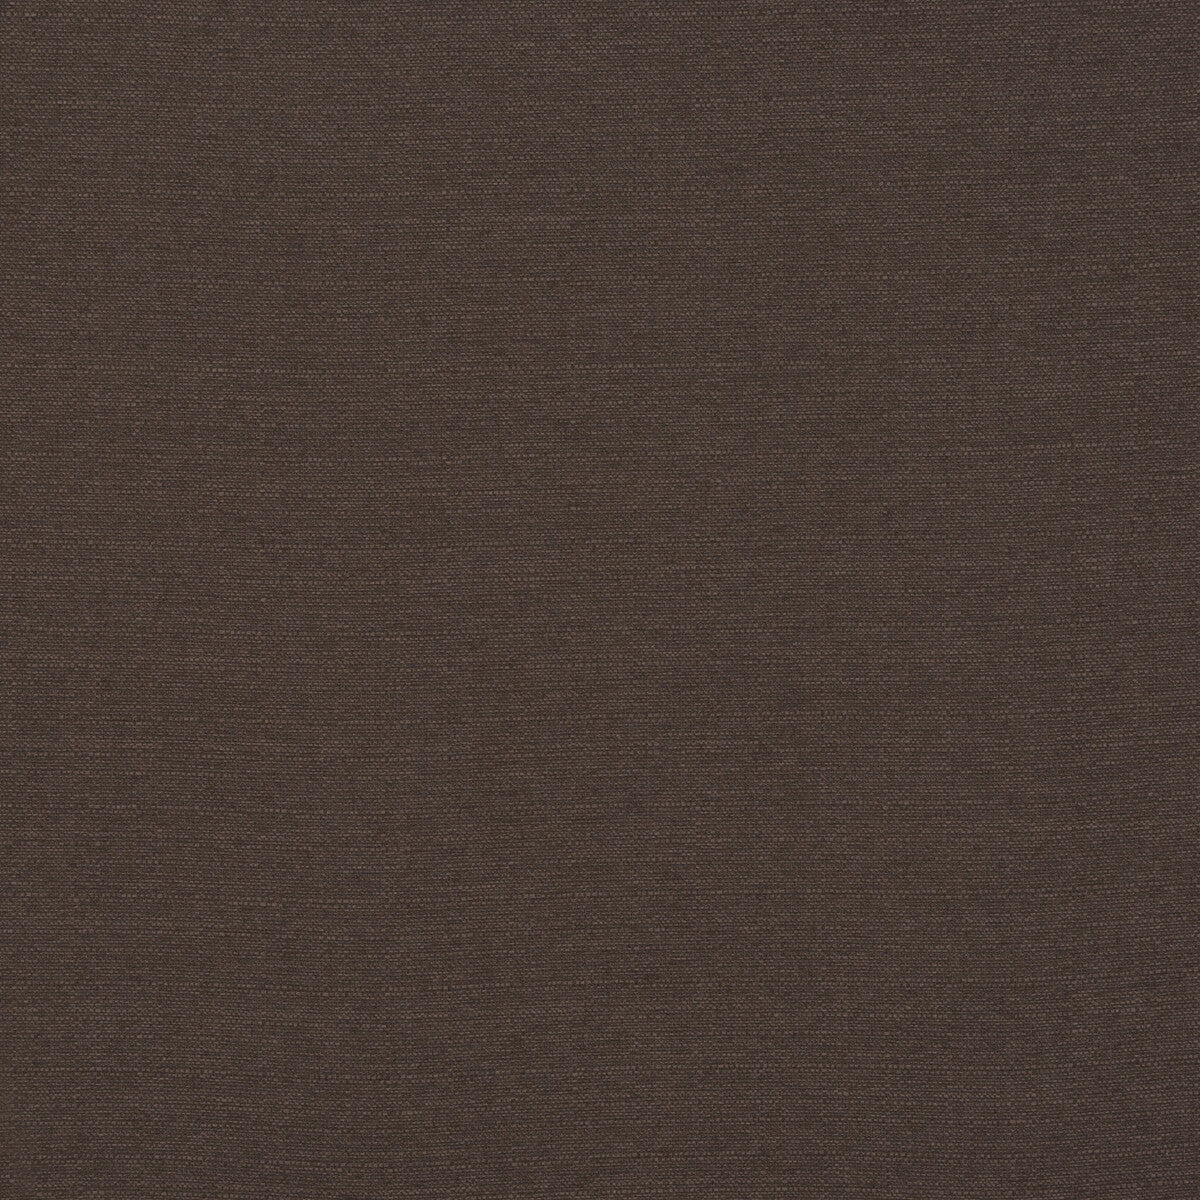 Lansdowne fabric in coffee bean color - pattern PF50413.295.0 - by Baker Lifestyle in the Notebooks collection